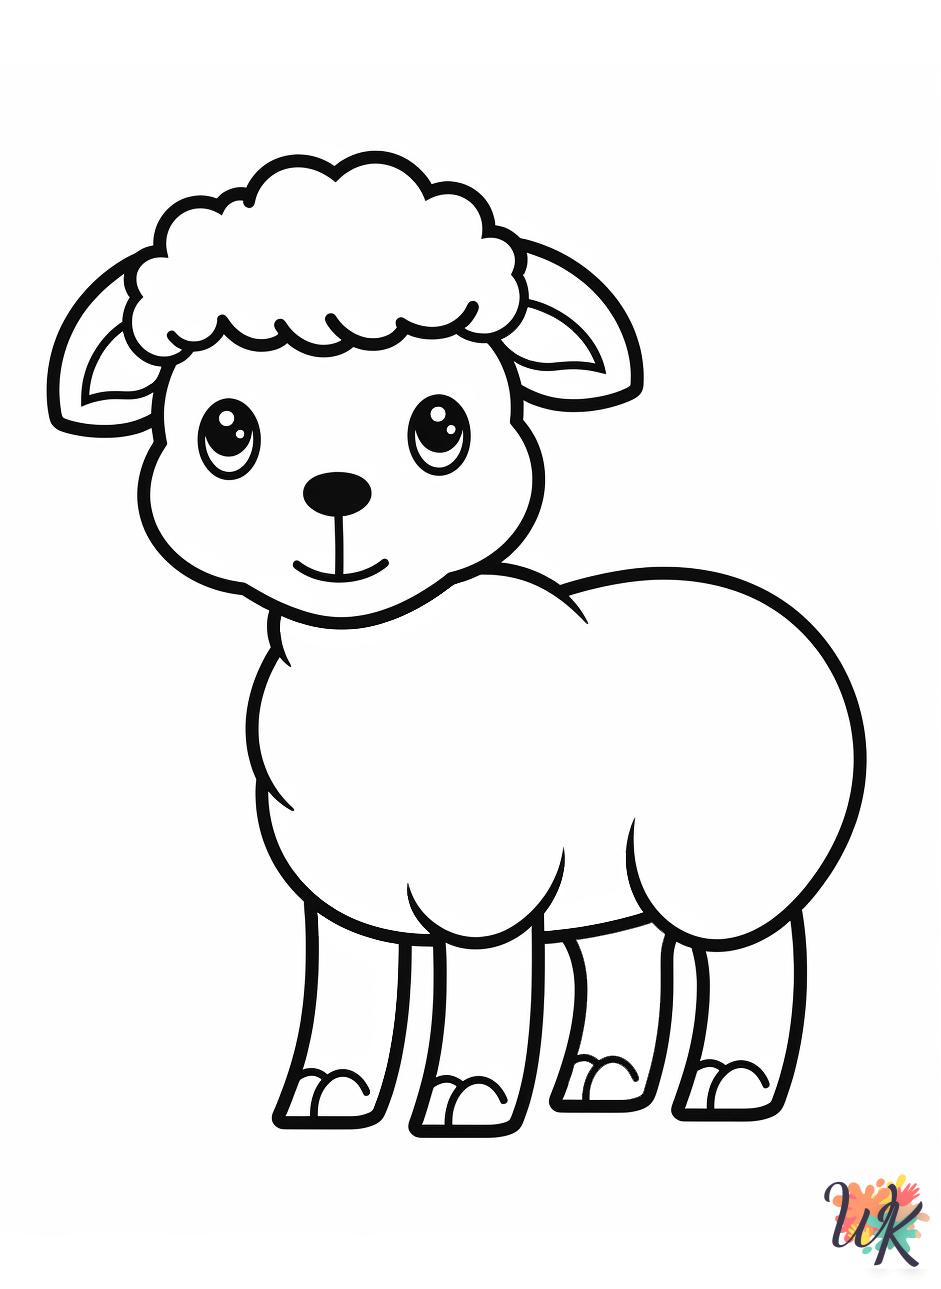 Sheep coloring pages for adults easy